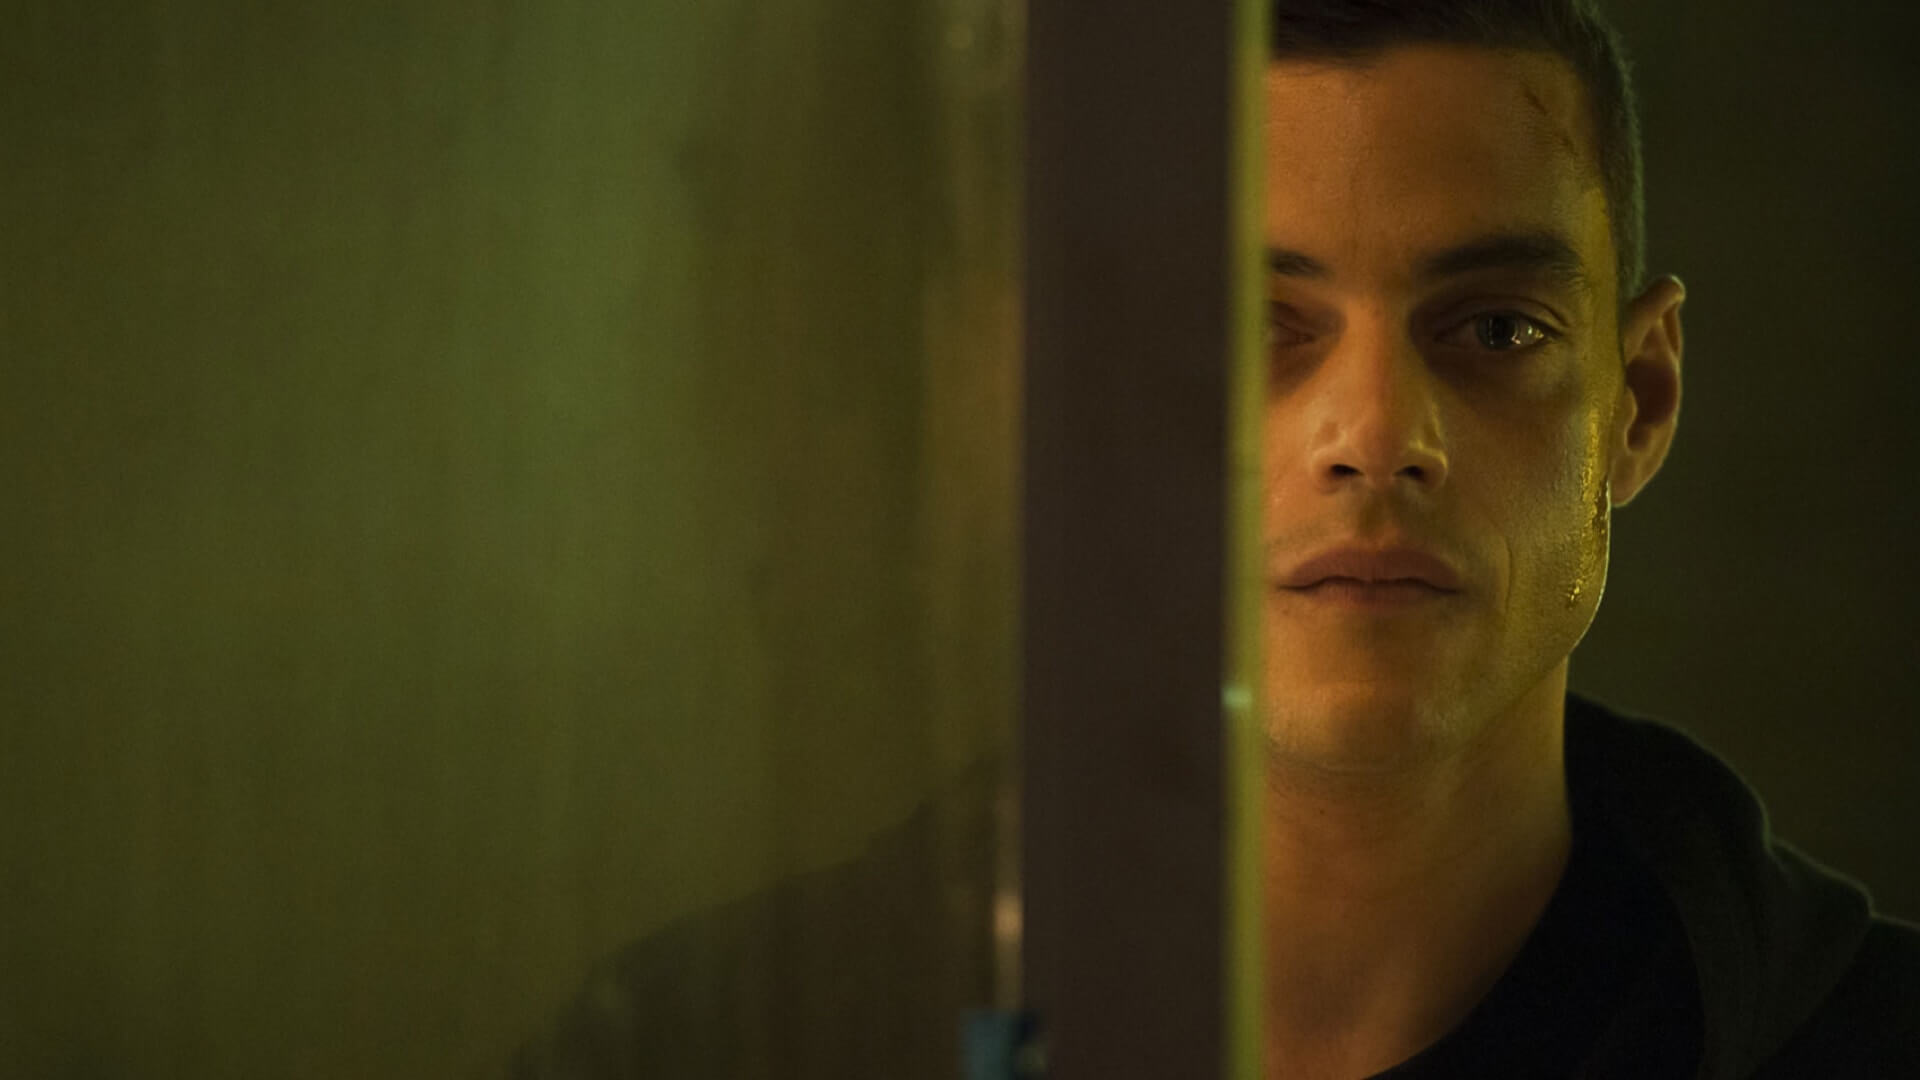 How 'Mr. Robot' Uses Lower Quadrant Framing to Create a Feeling of